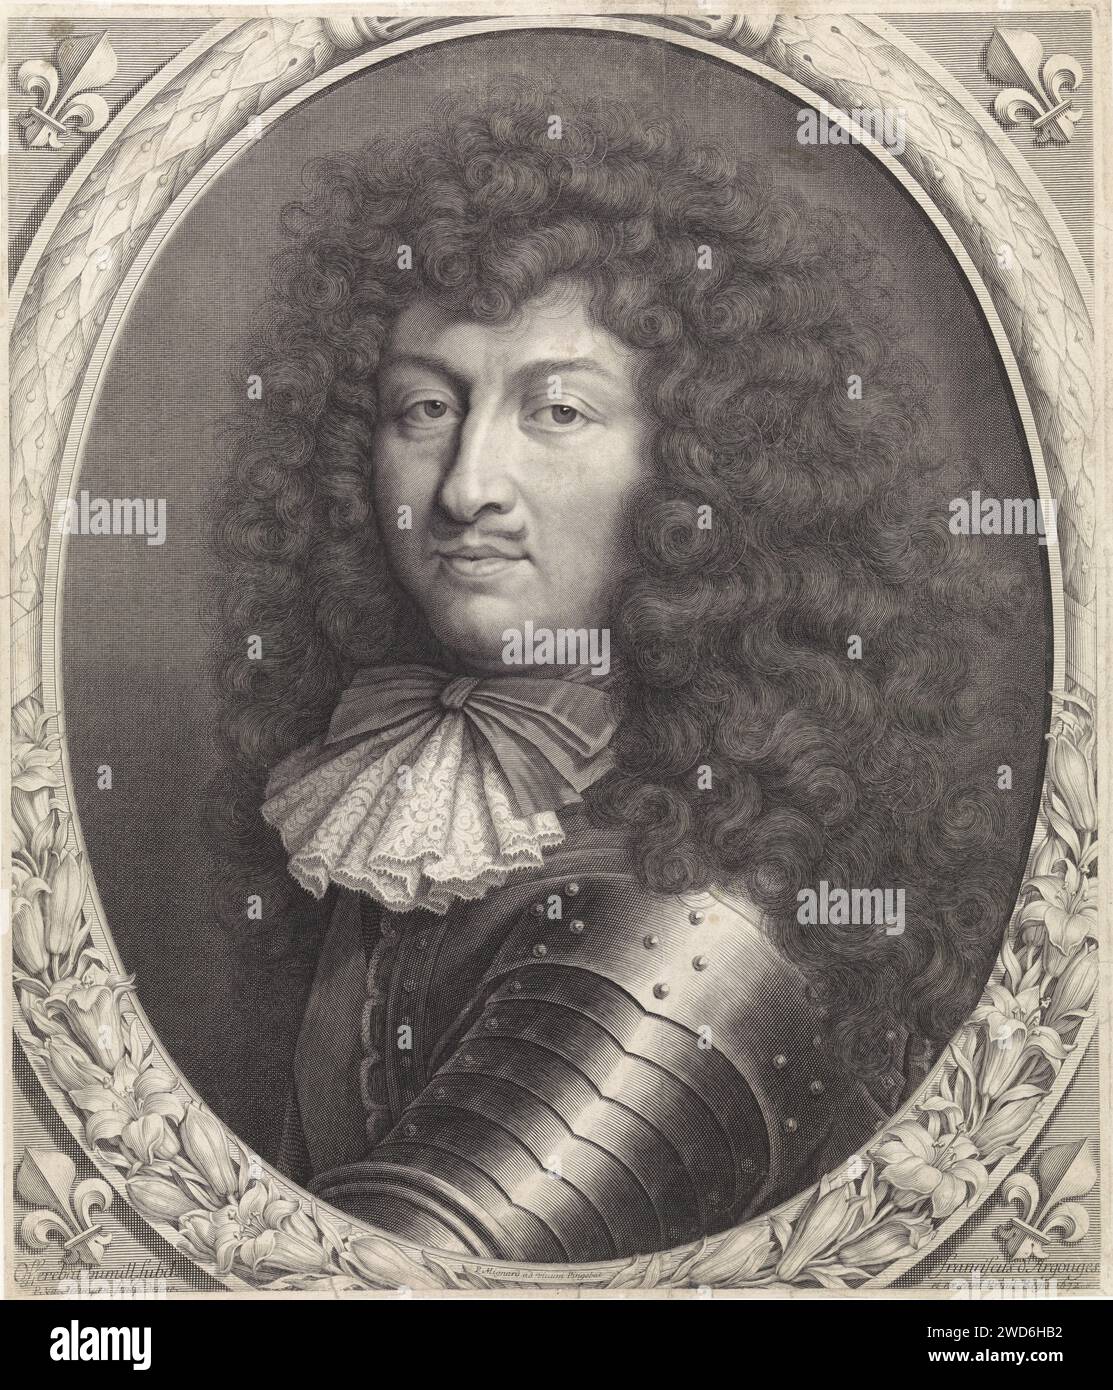 Portrait of Louis XIV, King of France, with a bow in an oval frame with lilies, Pieter van Schuppen, After P. Mignard, 1672 print  Paris paper engraving Stock Photo